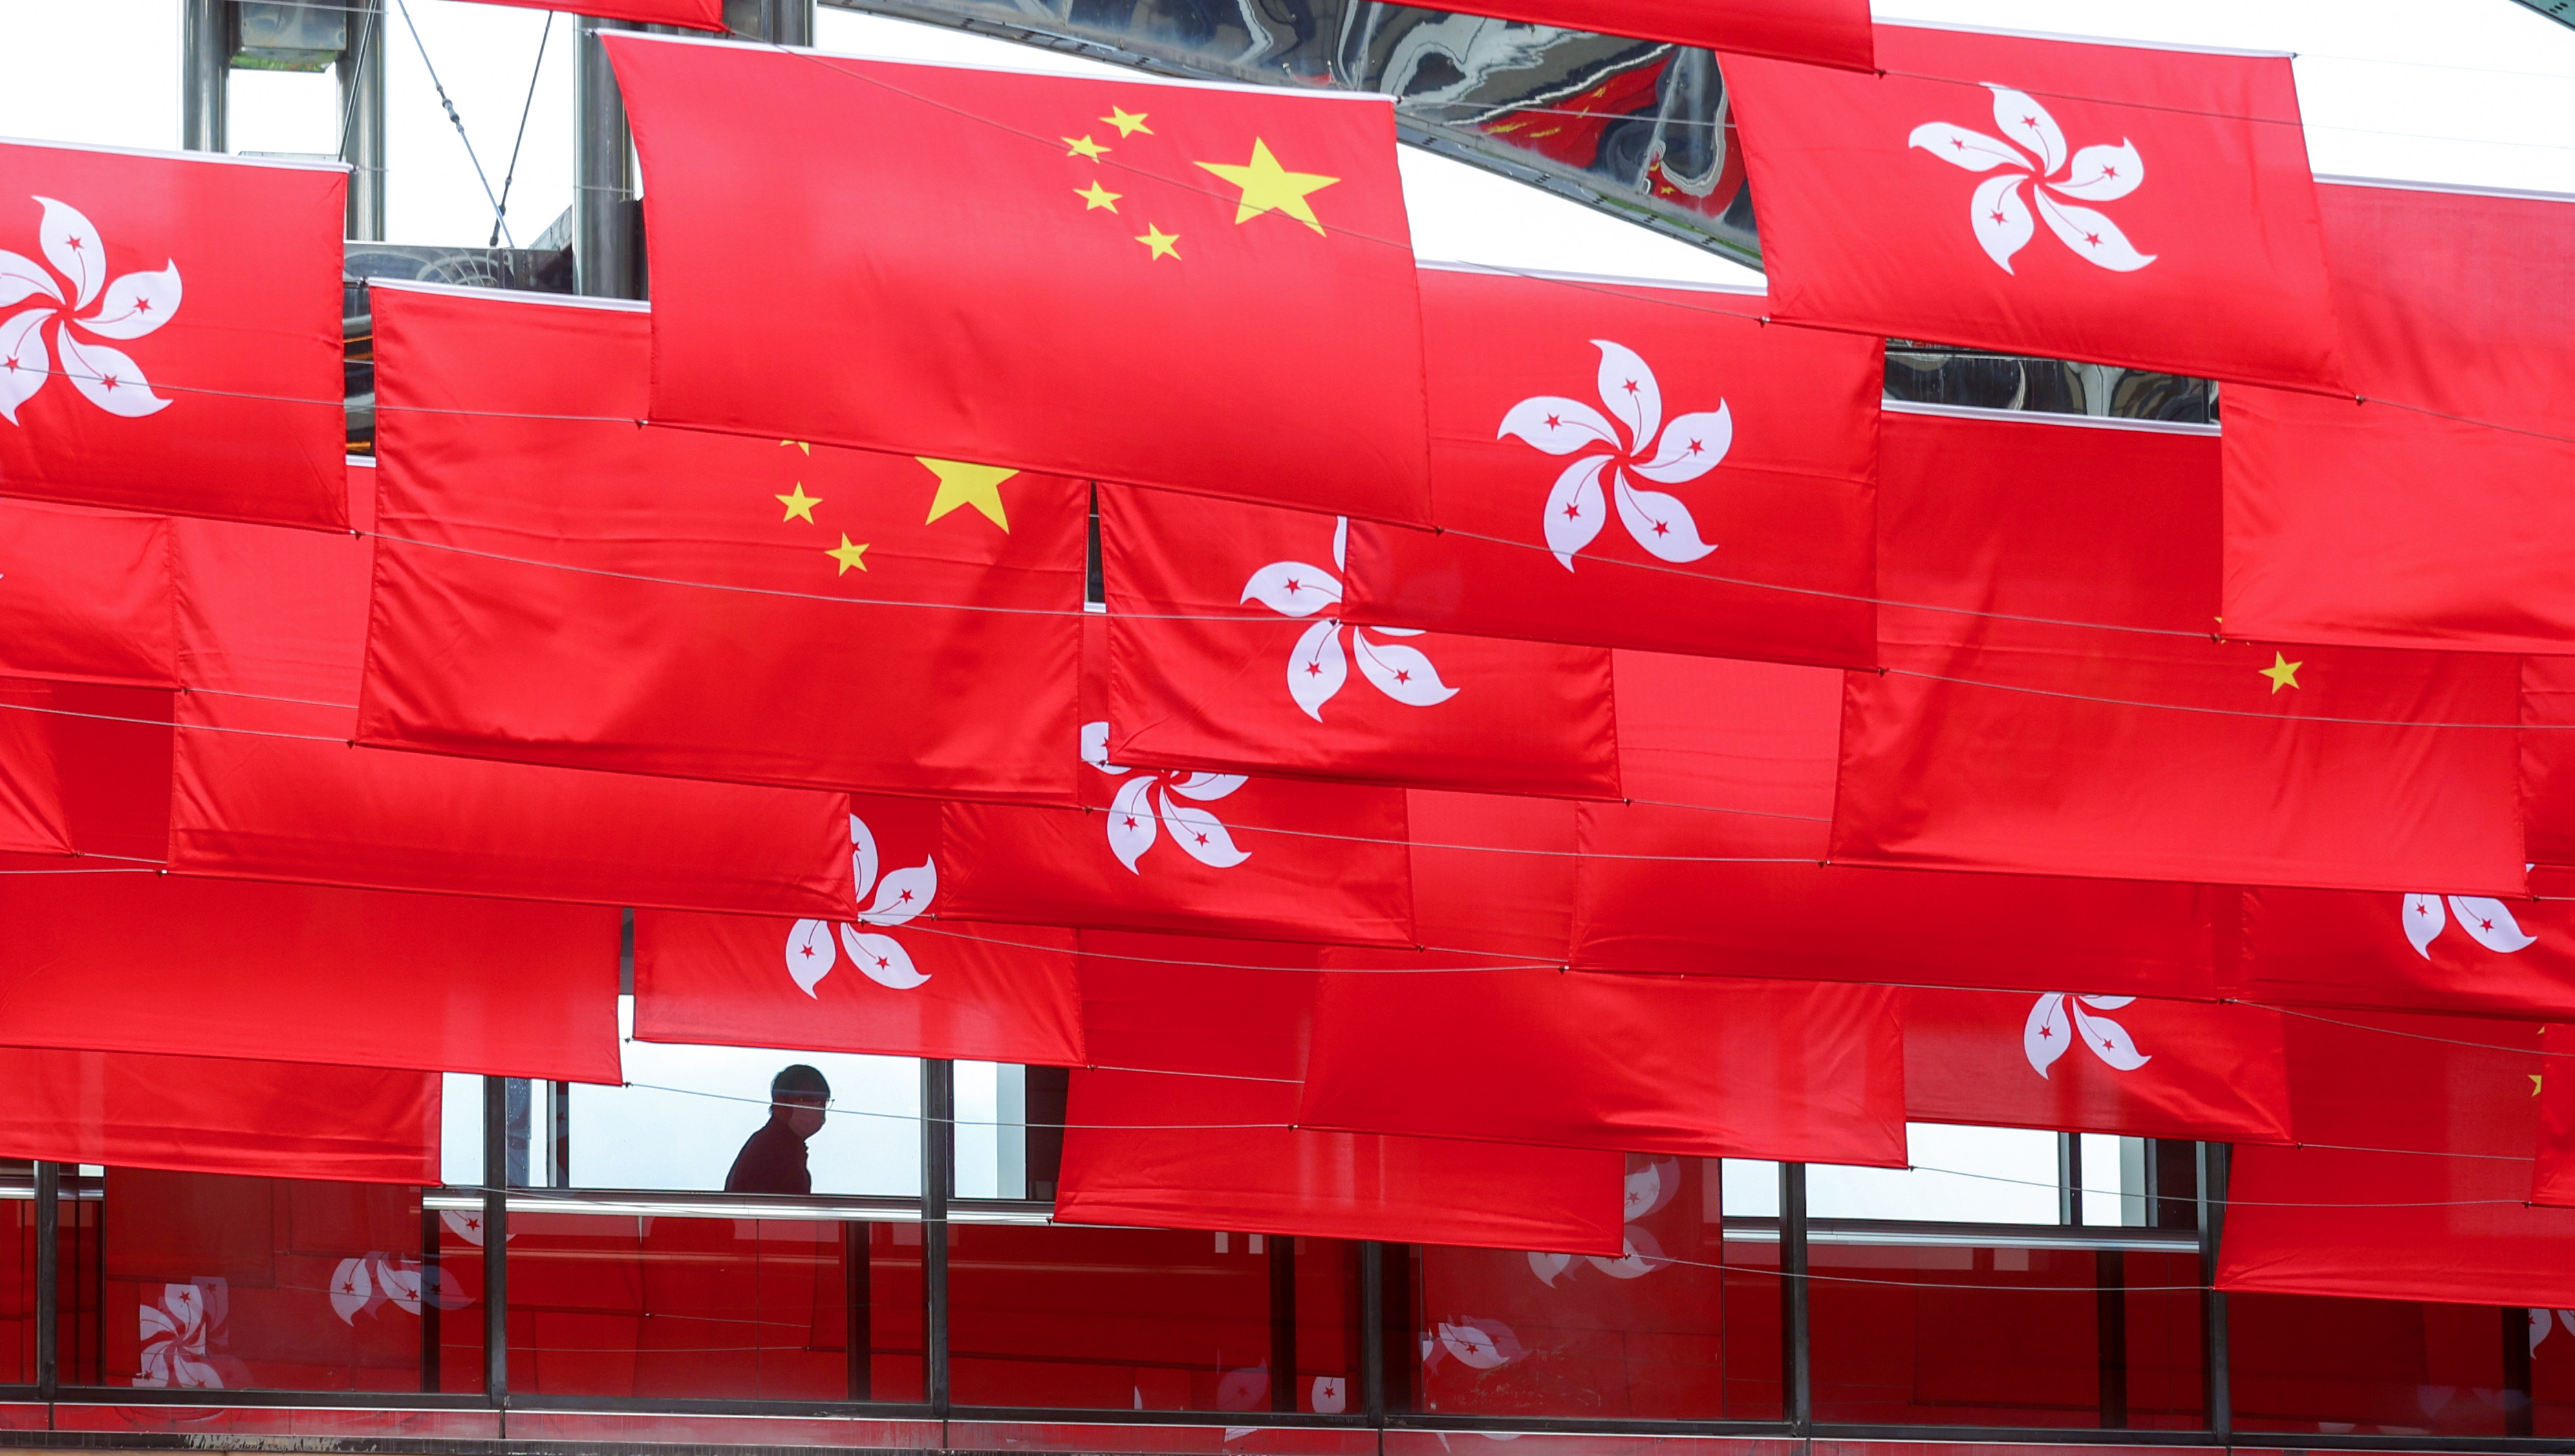 Chinese National Flags and Regional flags of Hong Kong are seen on June 27 in a street in Tsim Sha Tsui as a part of celebrations marking the anniversary of the city’s return to China. Photo: Yik Yeung-man